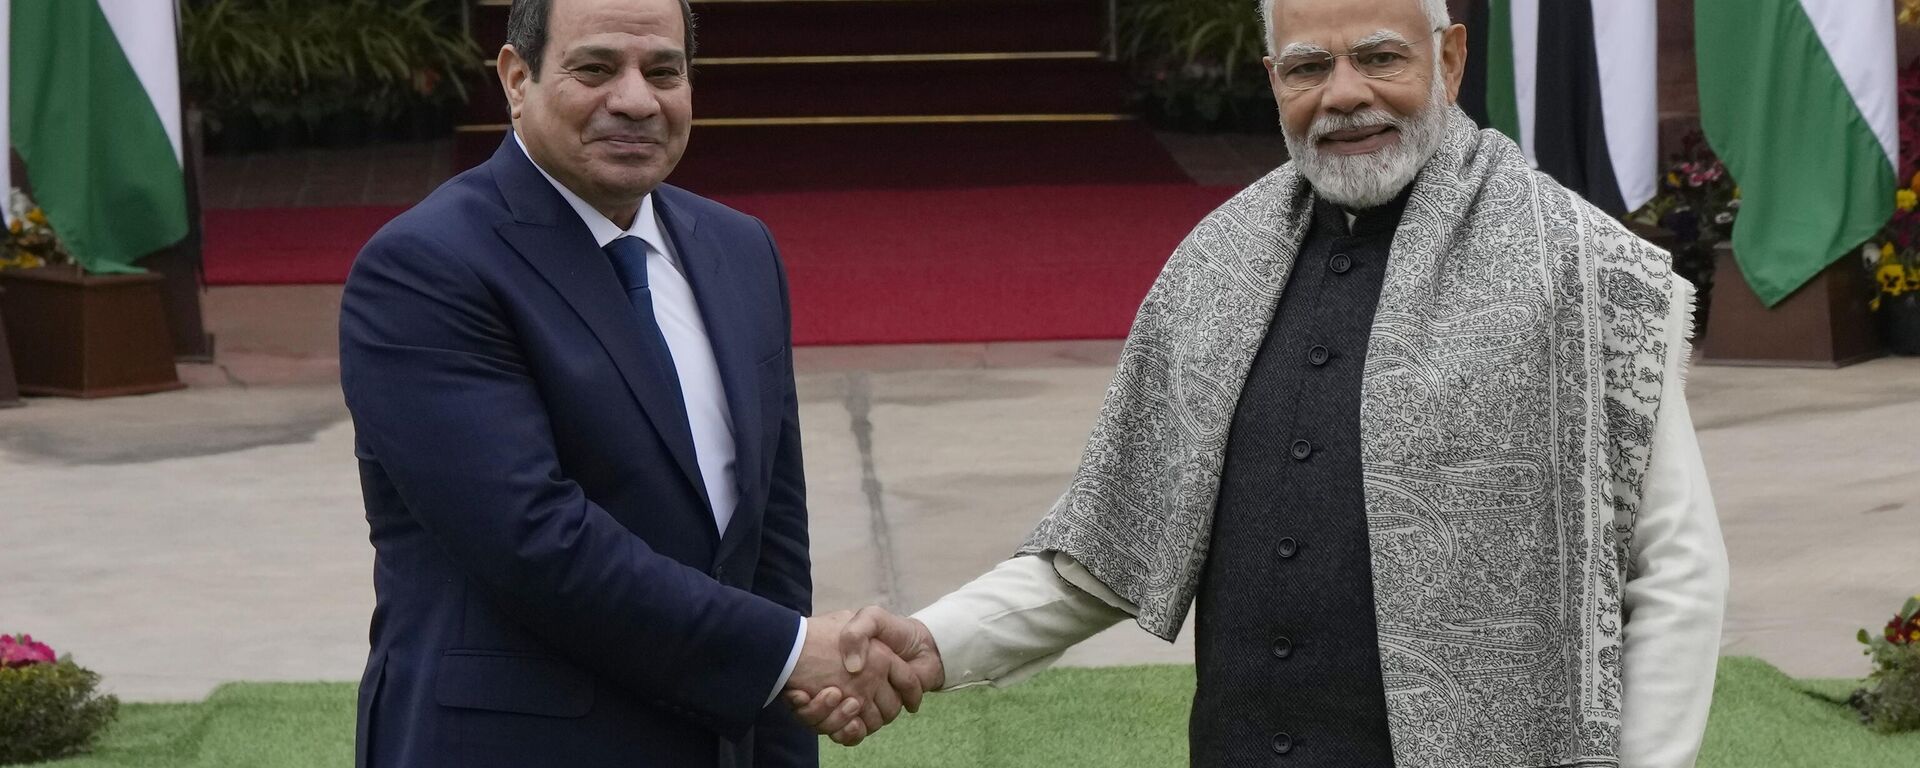 Indian Prime Minister Narendra Modi, right, shakes hand with Egyptian President Abdel Fattah El-Sisi before the start of their meeting in New Delhi, India, Wednesday, Jan. 25, 2023. - Sputnik India, 1920, 24.06.2023